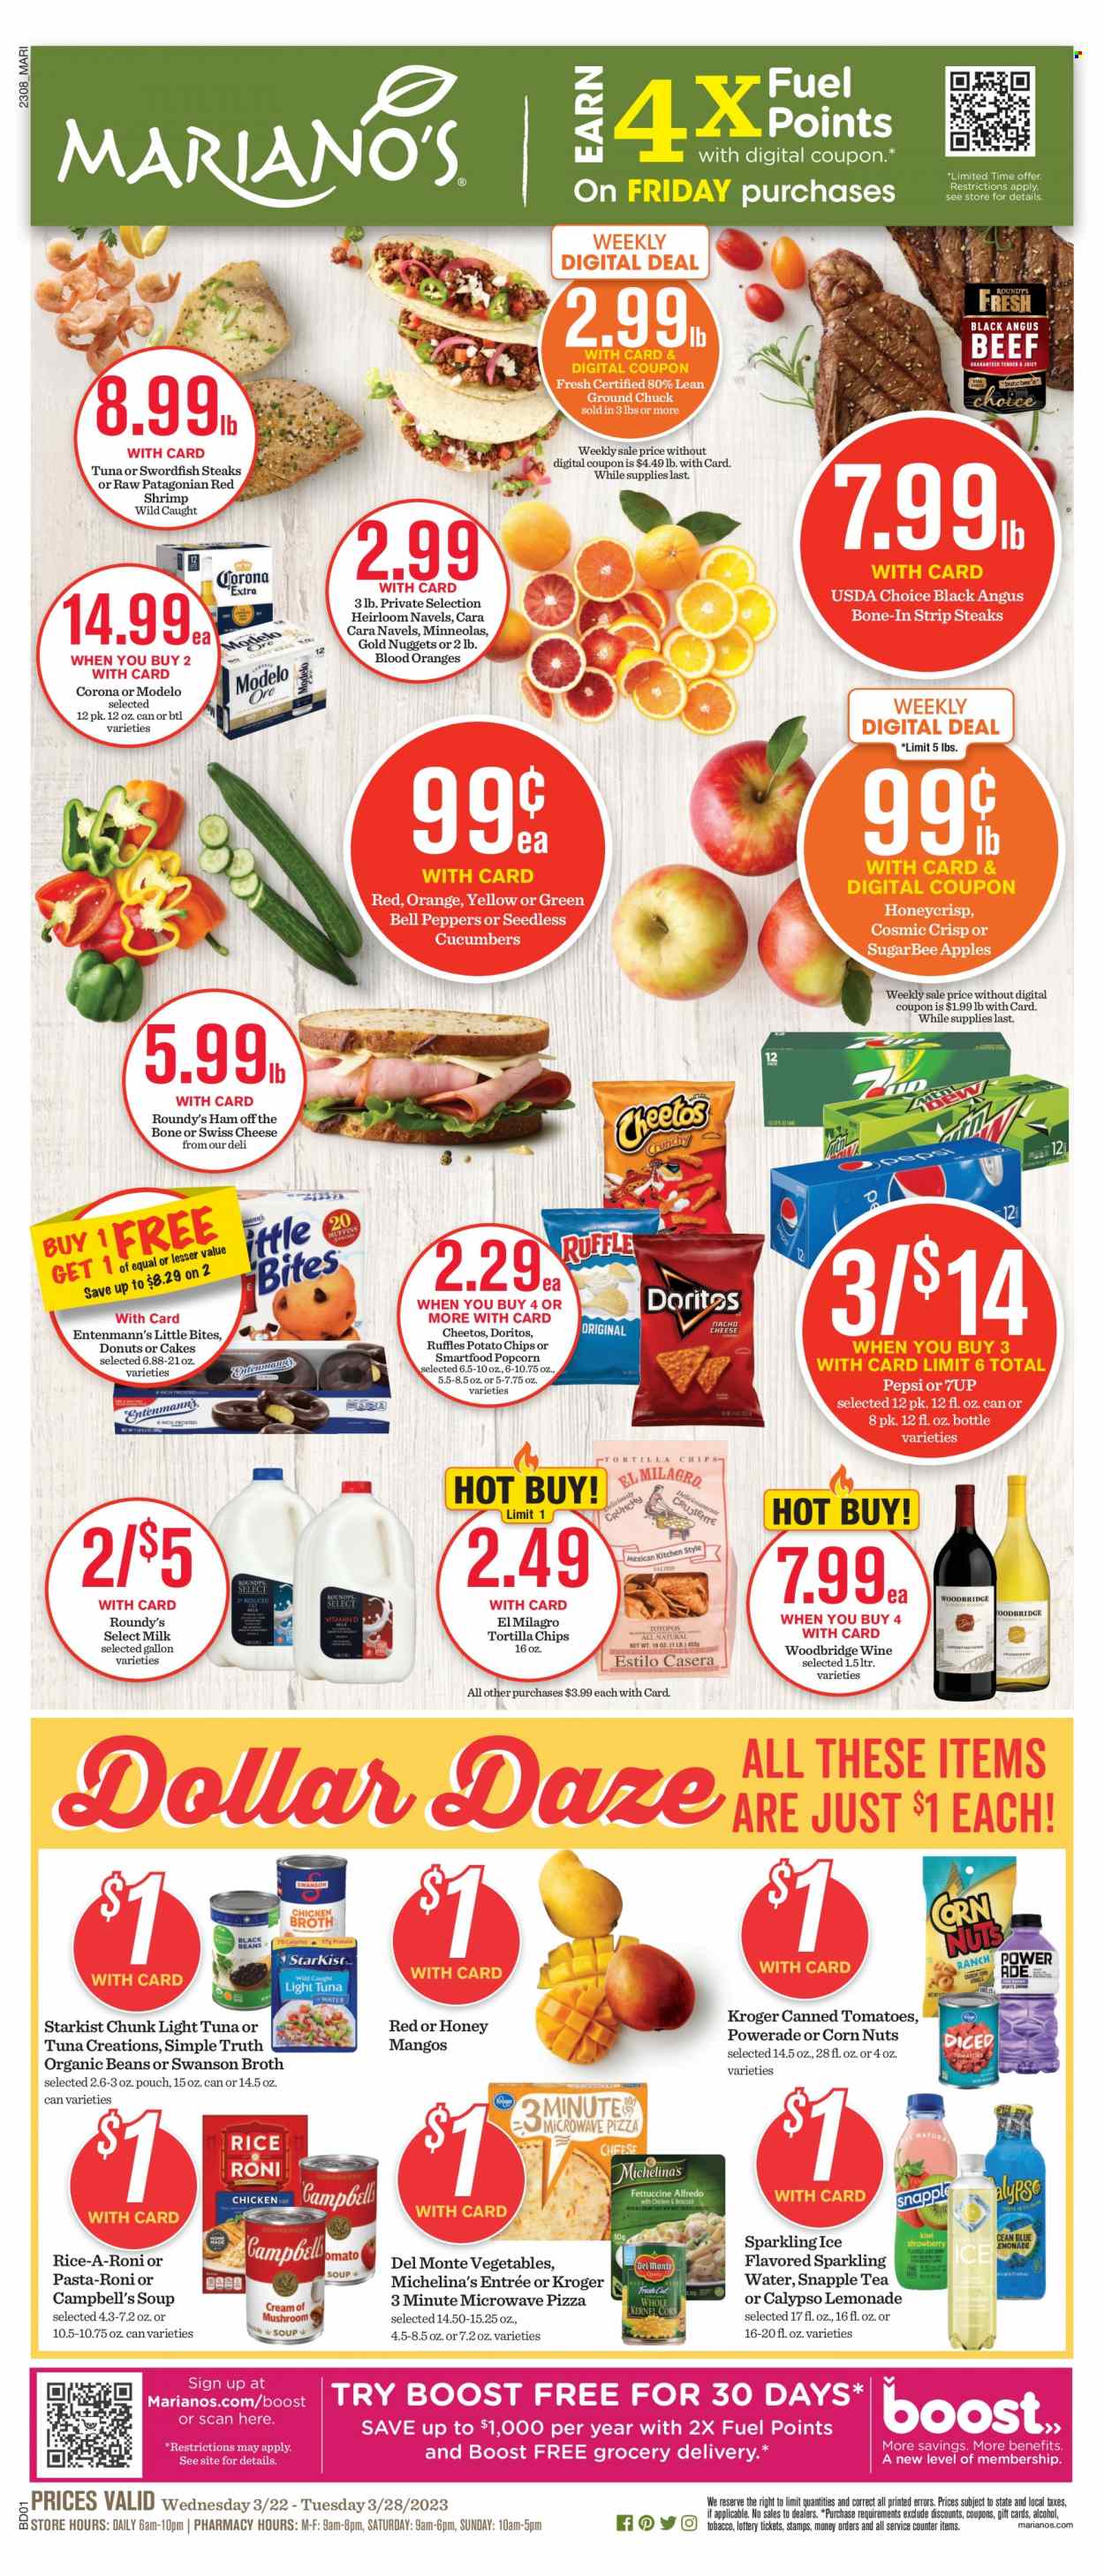 thumbnail - Mariano’s Flyer - 03/22/2023 - 03/28/2023 - Sales products - cake, donut, Entenmann's, beans, bell peppers, corn, cucumber, peppers, apples, tuna, shrimps, StarKist, Campbell's, pizza, soup, nuggets, ham, swiss cheese, milk, Little Bites, Doritos, tortilla chips, potato chips, Cheetos, chips, Smartfood, popcorn, broth, light tuna, Del Monte, rice, lemonade, Powerade, Pepsi, 7UP, Snapple, sparkling water, water, Boost, tea, wine, alcohol, Woodbridge, beer, Corona Extra, Modelo, beef meat, ground chuck, steak, striploin steak, navel oranges. Page 1.